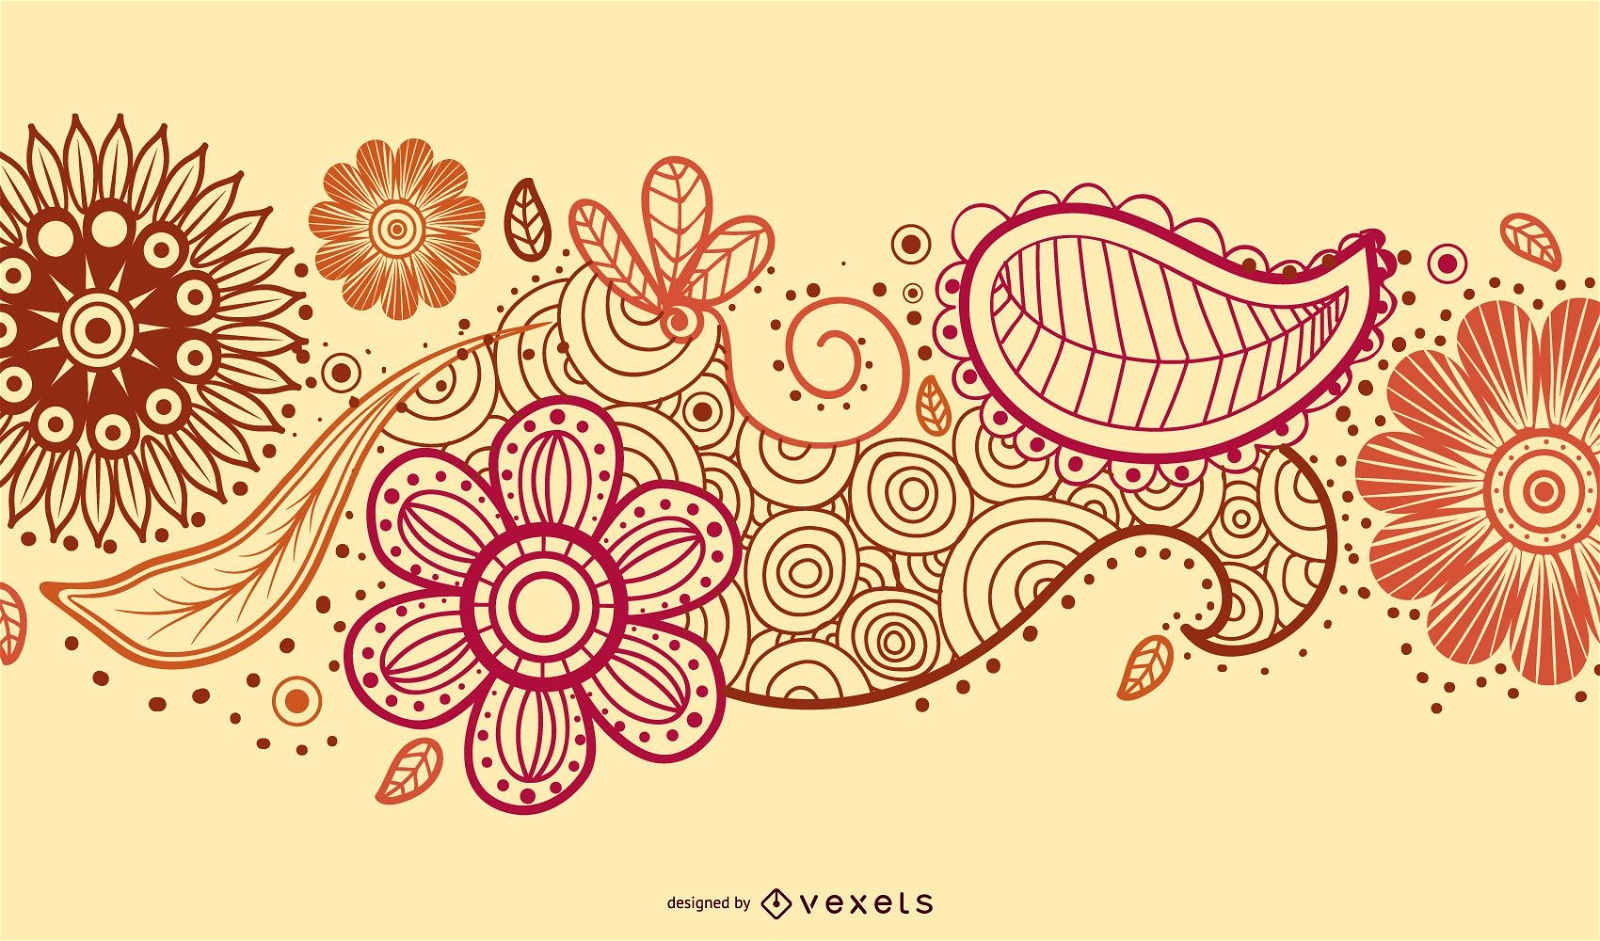 Drawn paisley design with flowers